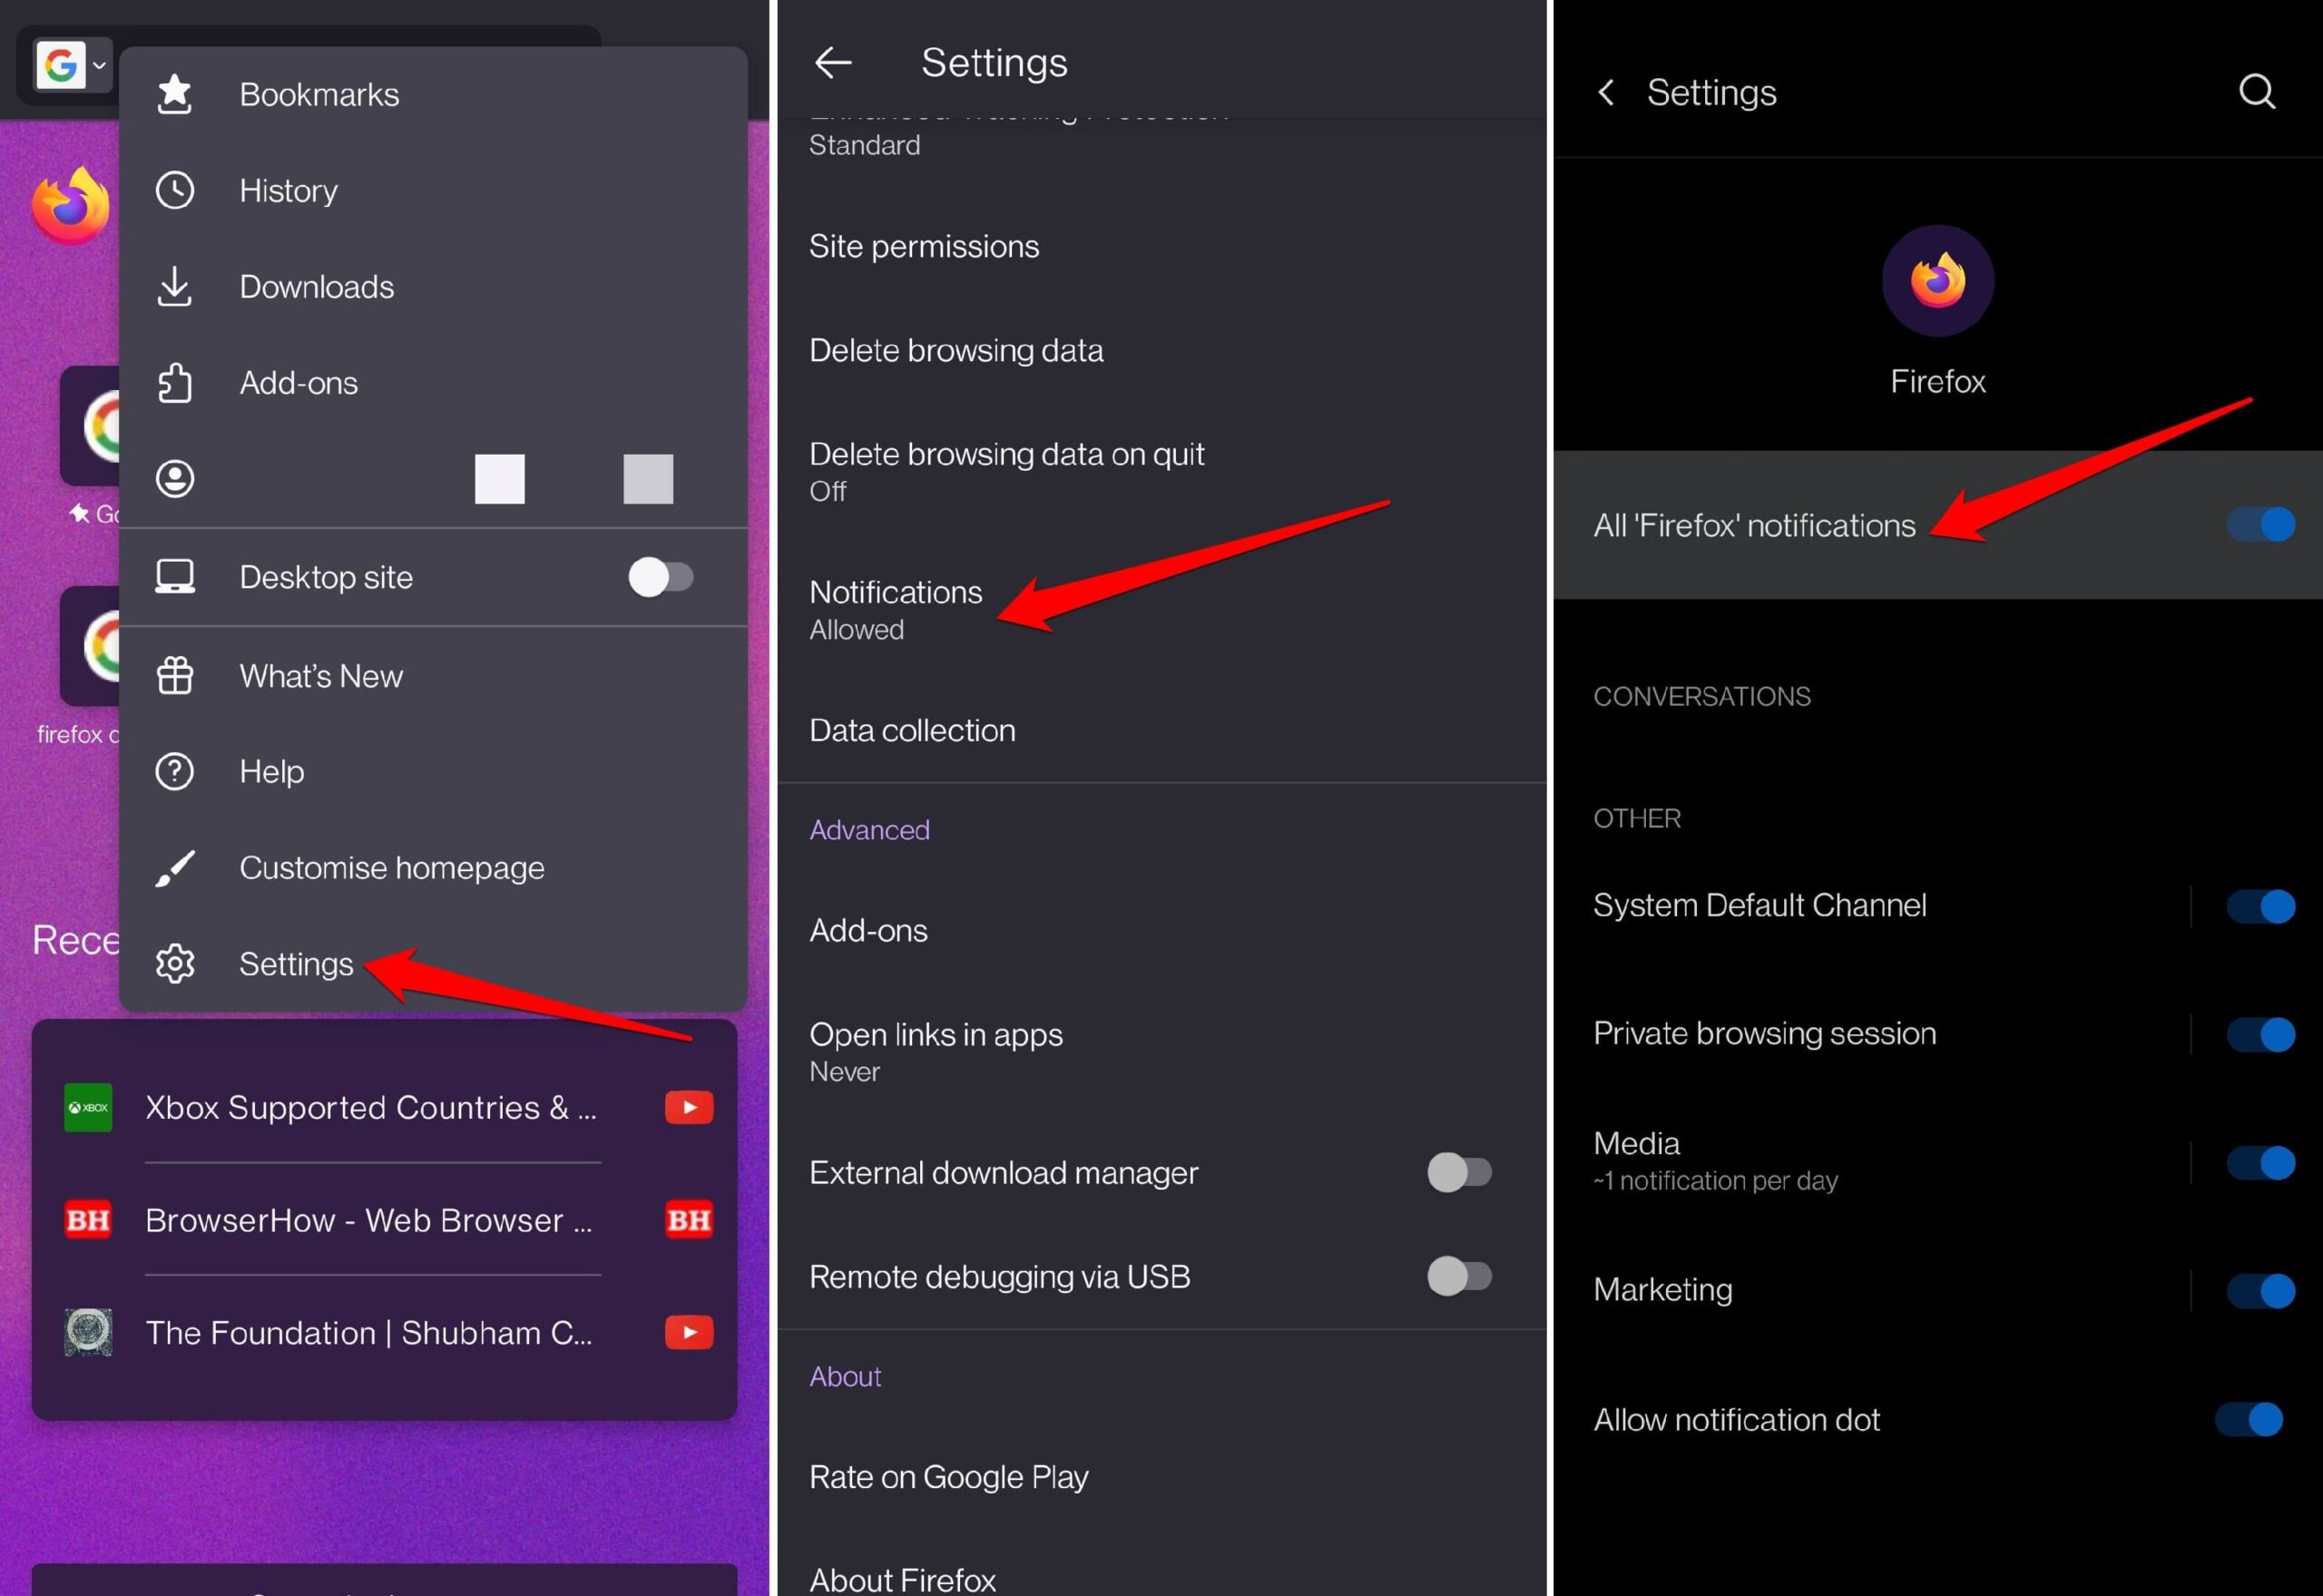 enable all firefox notifications on Android scaled